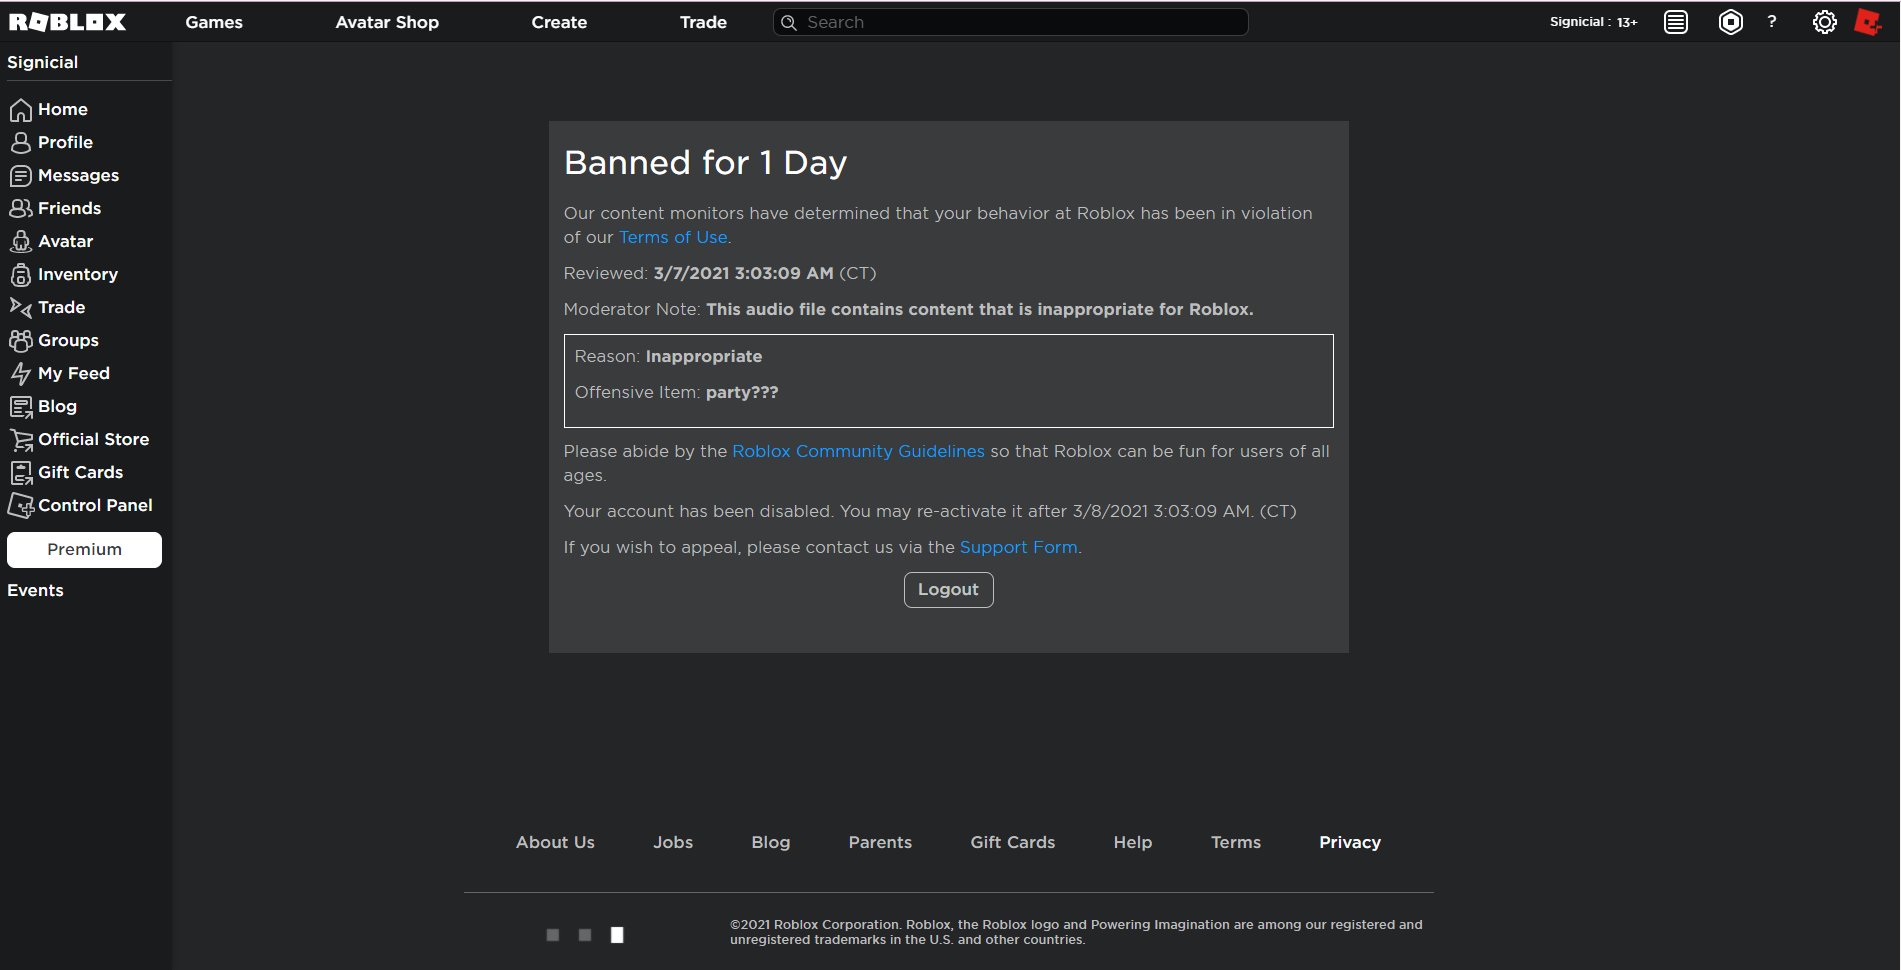 Signicial On Twitter Moderation Let S Gooooooo I M Banned Before Hey Sant The Arsenal Exploiter In Such A Way What A Sarcasm As A Star Program User Lmao Roblox Anyway I Guess 1 - roblox banned for 1 day